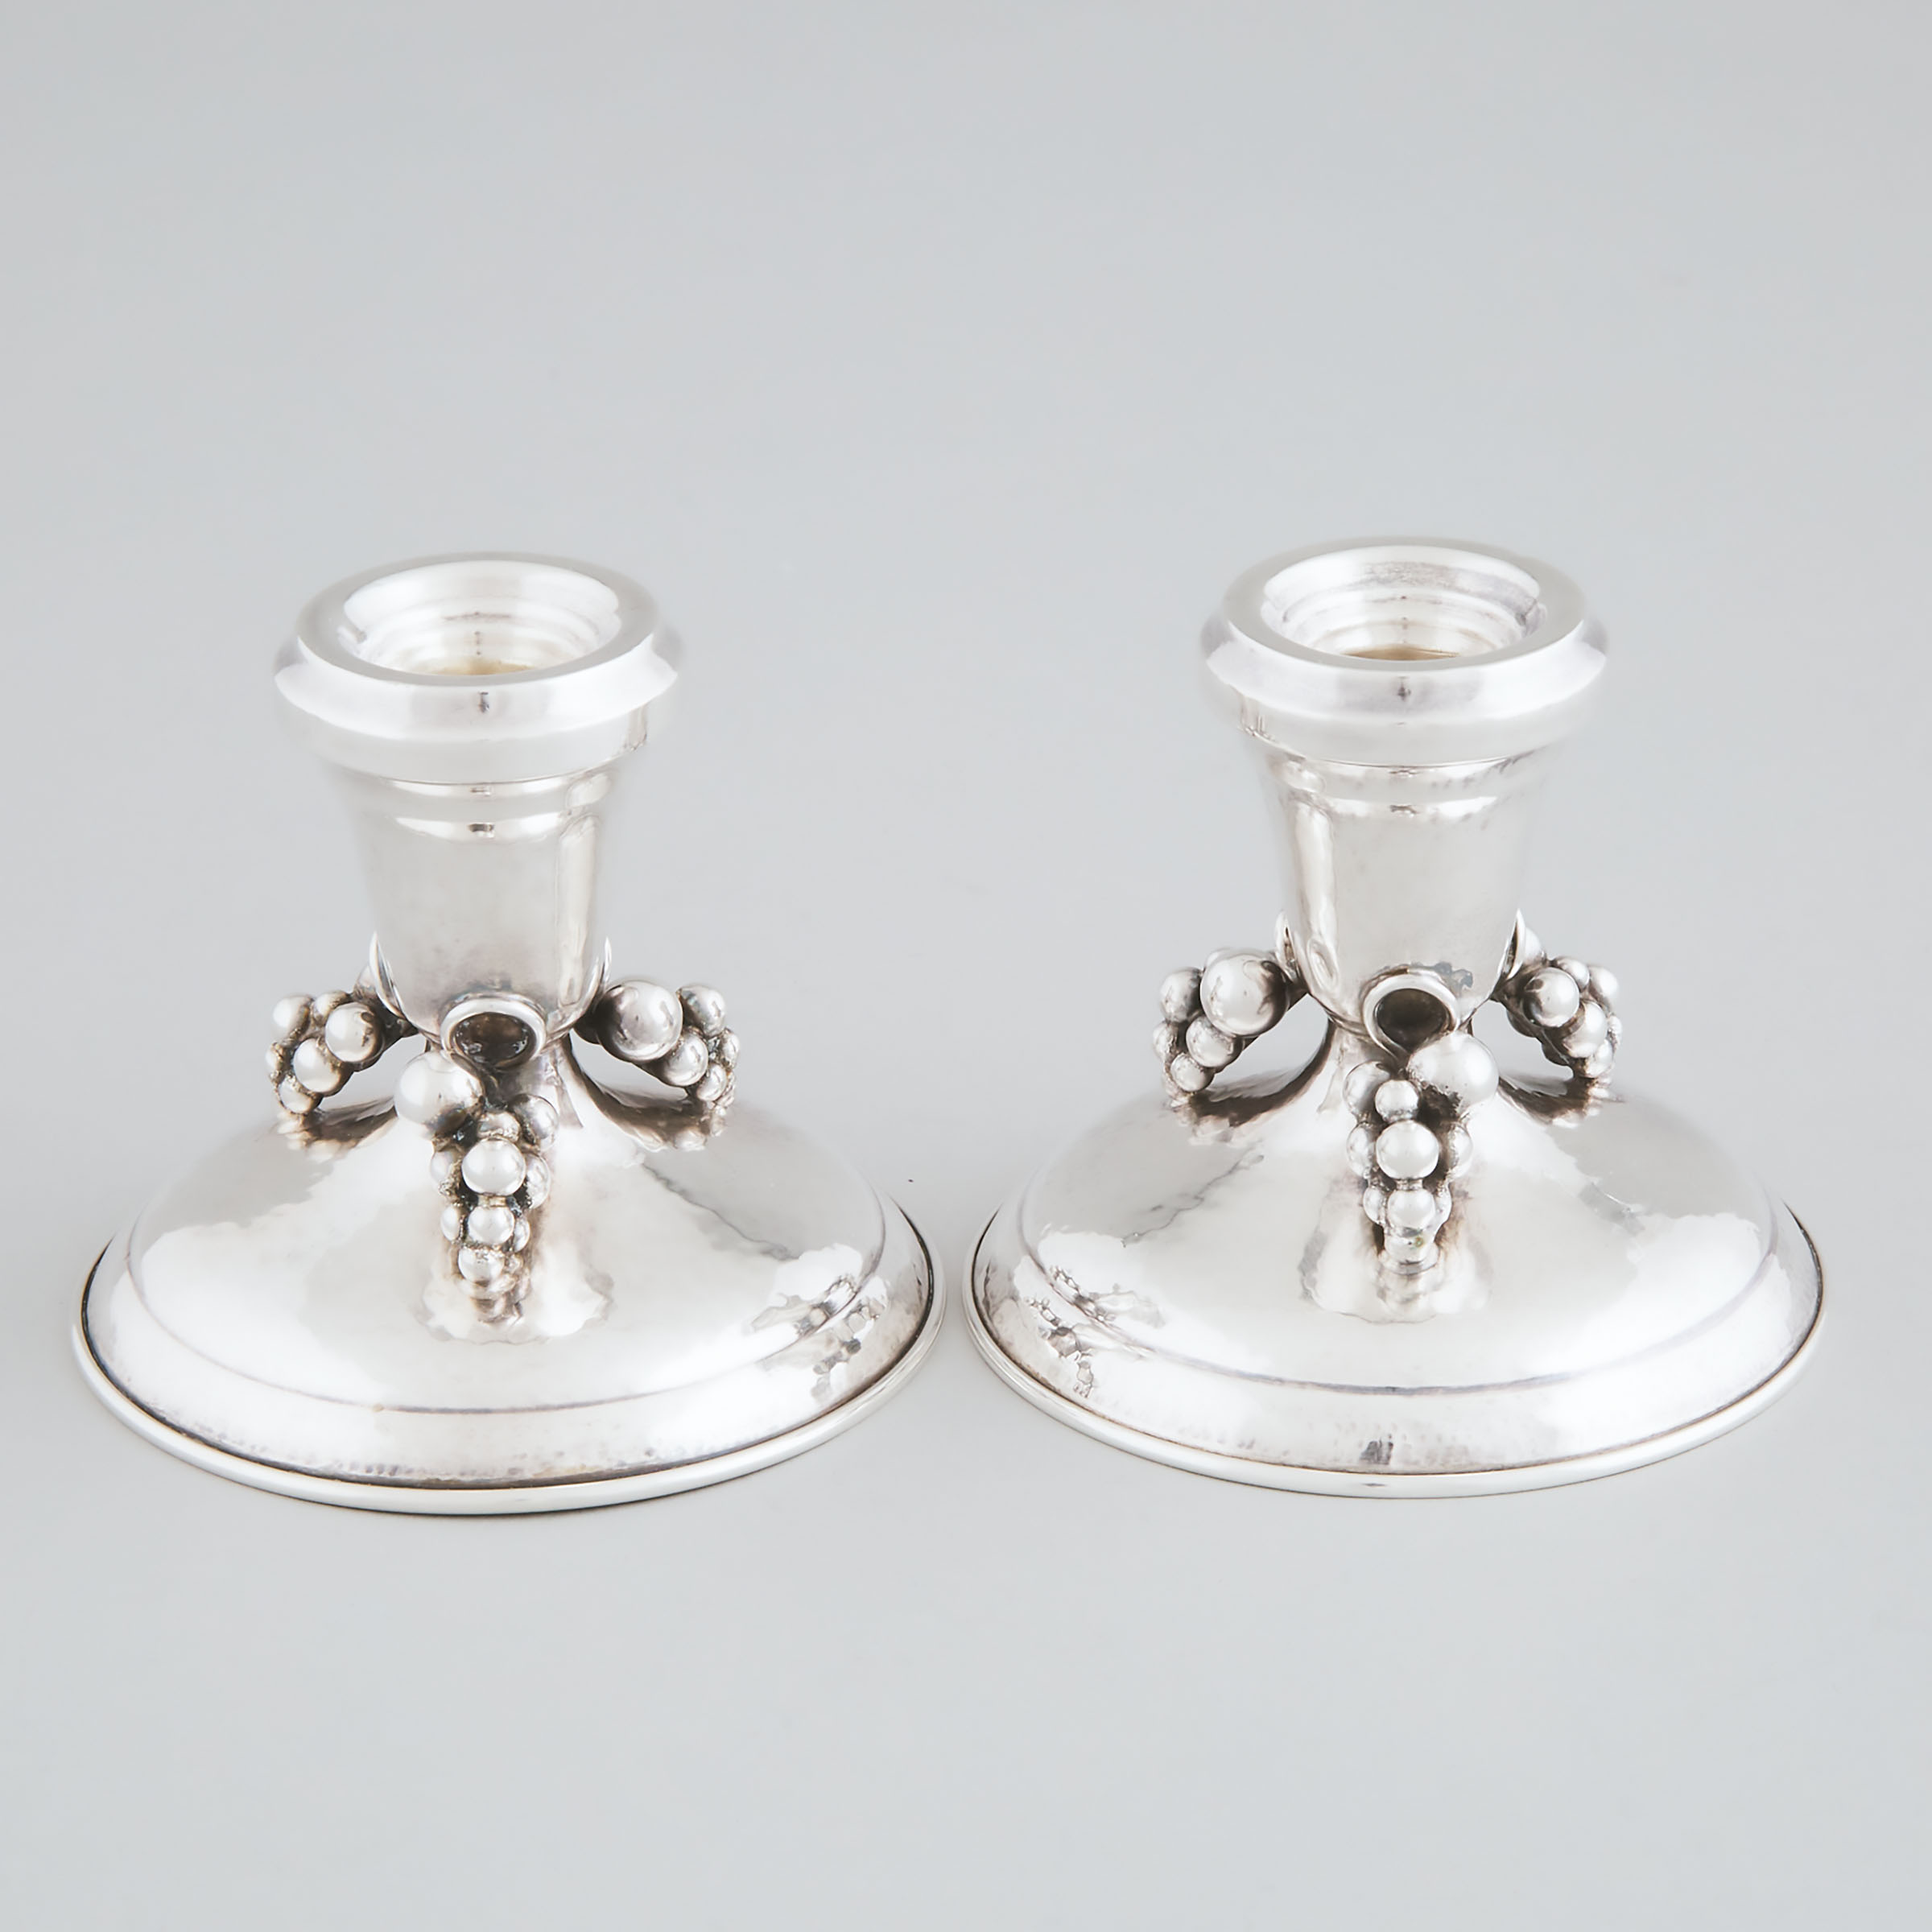 Pair of Canadian Silver Low Candlesticks, Poul Petersen, Montreal, Que., mid-20th century